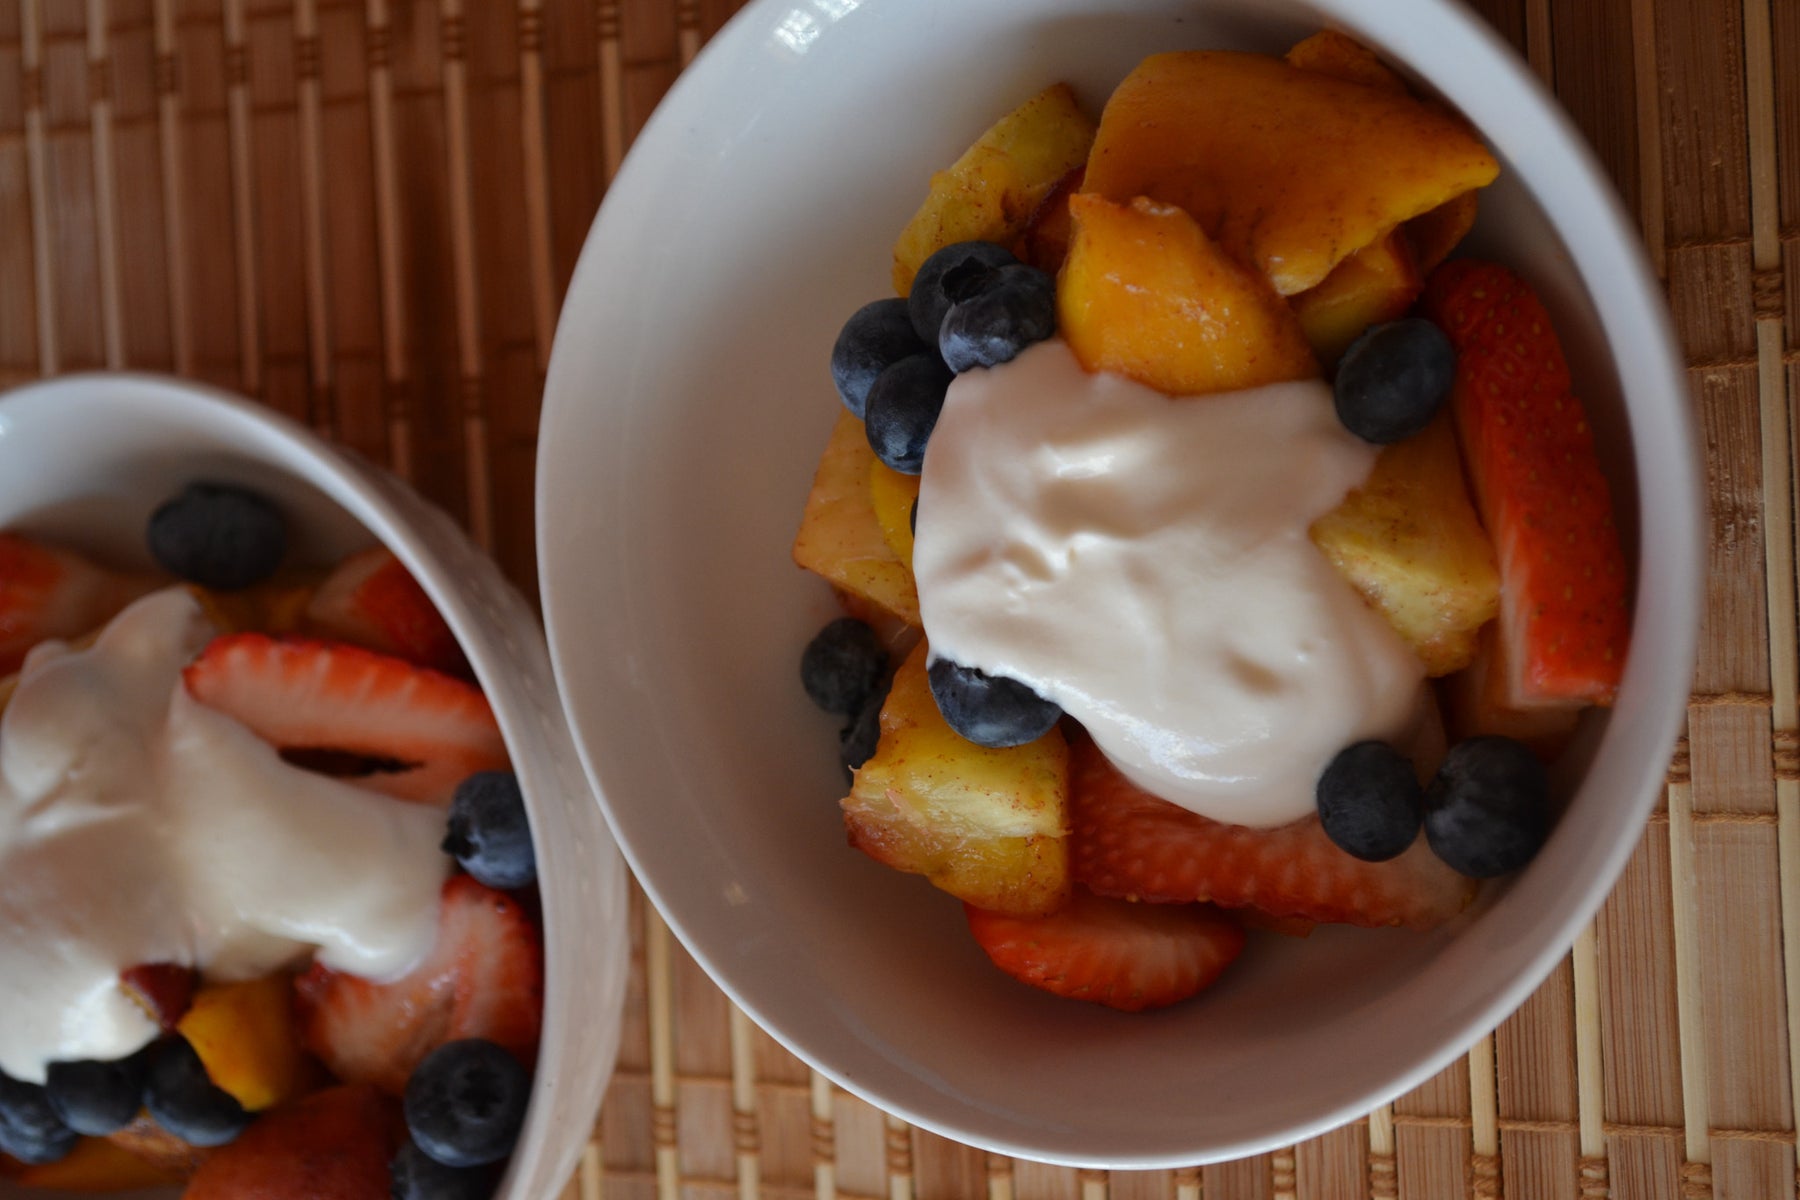 Grilled Fruit Salad with Maple Whipped Cream Topping